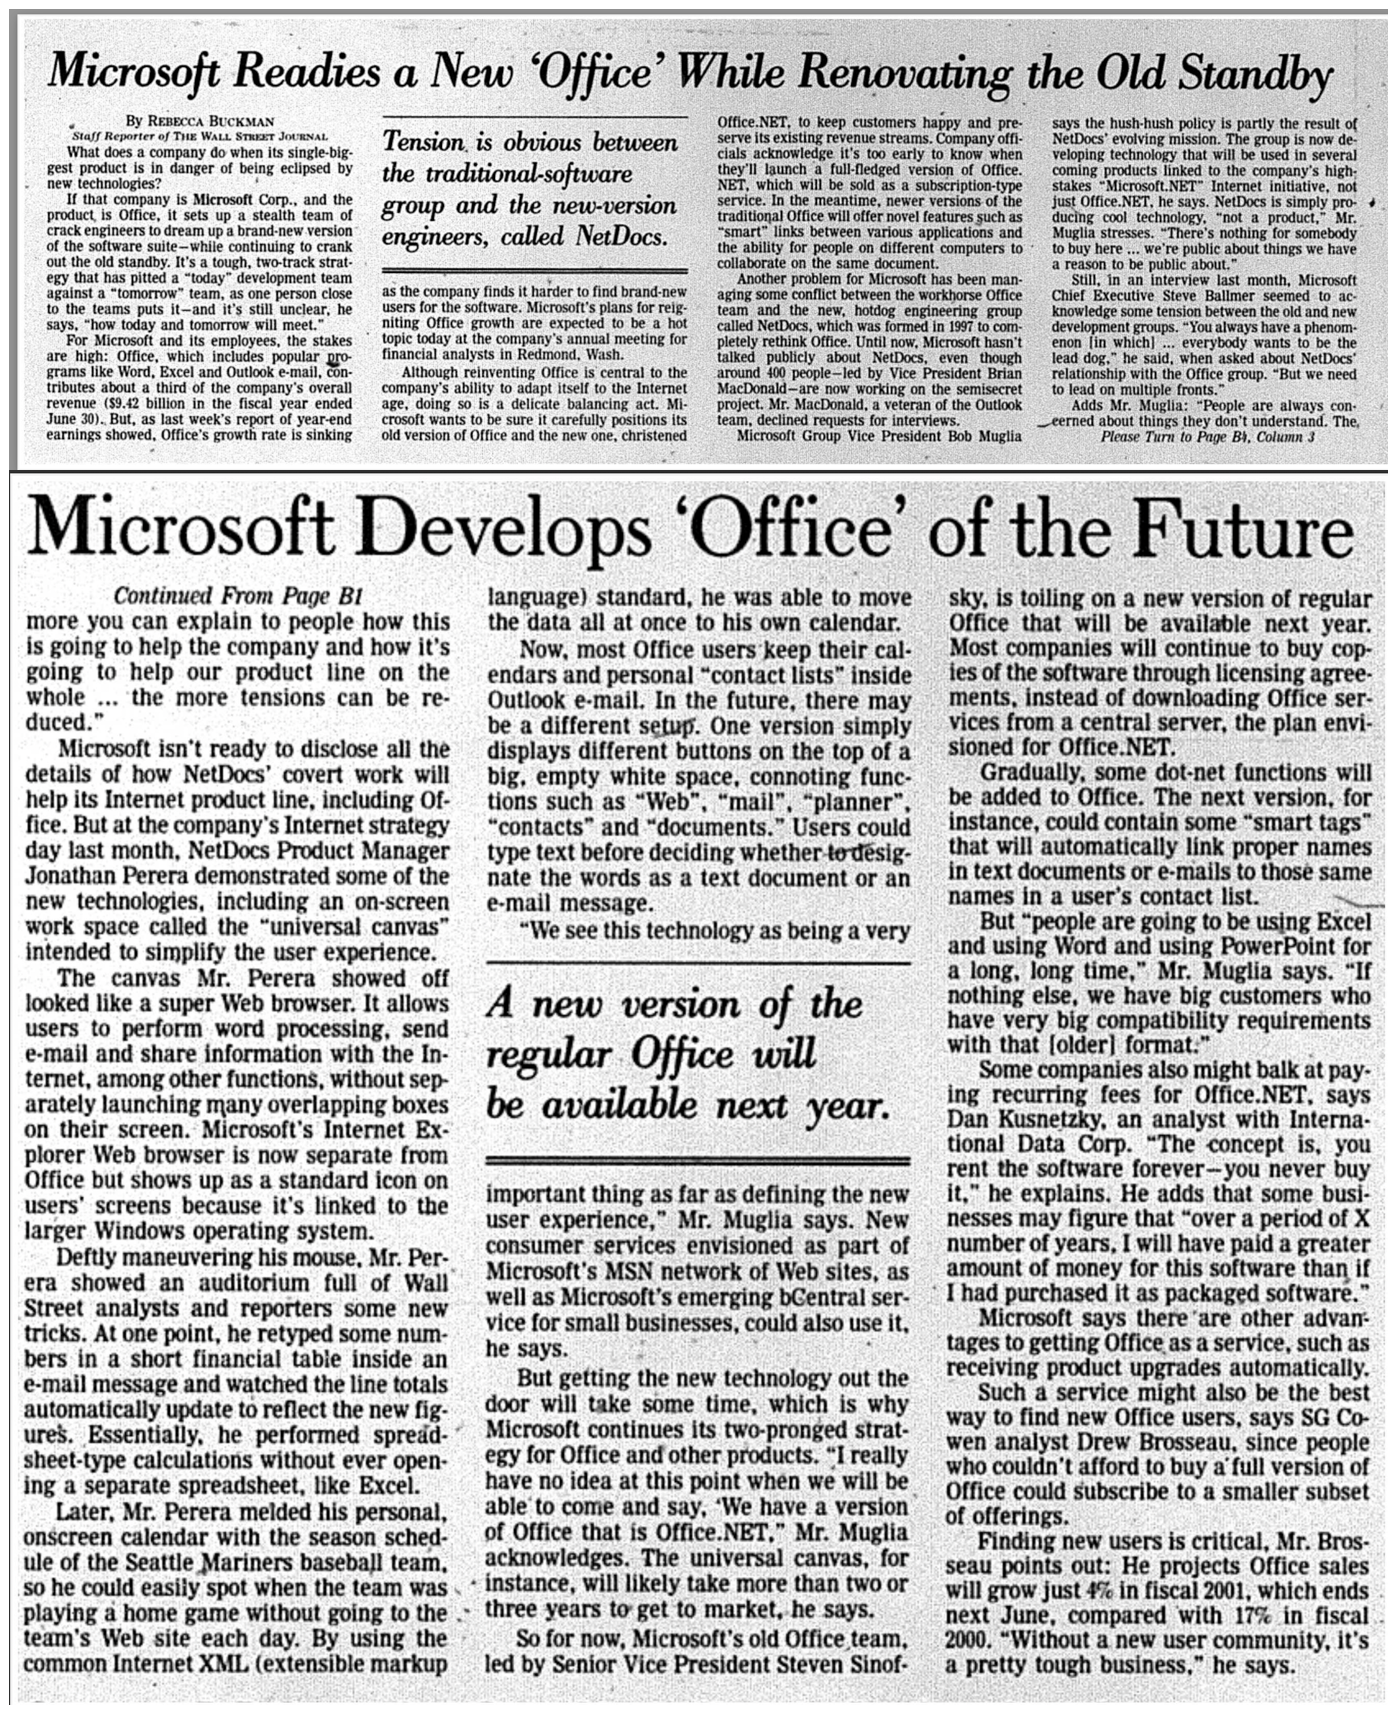 If that company is Microsoft Corp., and the product is Office, it sets up a stealth team of crack engineers to dream up a brand-new version of the software suite -- while continuing to crank out the old standby. It's a tough, two-track strategy that has pitted a "today" development team against a "tomorrow" team, as one person close to the teams puts it -- and it's still unclear, he says, "how today and tomorrow will meet." Microsoft Group Vice President Bob Muglia says the hush-hush policy is partly the result of NetDocs' evolving mission. The group is now developing technology that will be used in several coming products linked to the company's high-stakes "Microsoft.NET" Internet initiative, not just Office.NET, he says. NetDocs is simply producing cool technology, "not a product," Mr. Muglia stresses. "There's nothing for somebody to buy here . . . we're public about things we have a reason to be public about." Now, most Office users keep their calendars and personal "contact lists" inside Outlook e-mail. In the future, there may be a different setup. One version simply displays different buttons on the top of a big, empty white space, connoting functions such as "Web", "mail", "planner", "contacts" and "documents." Users could type text before deciding whether to designate the words as a text document or an e-mail message.